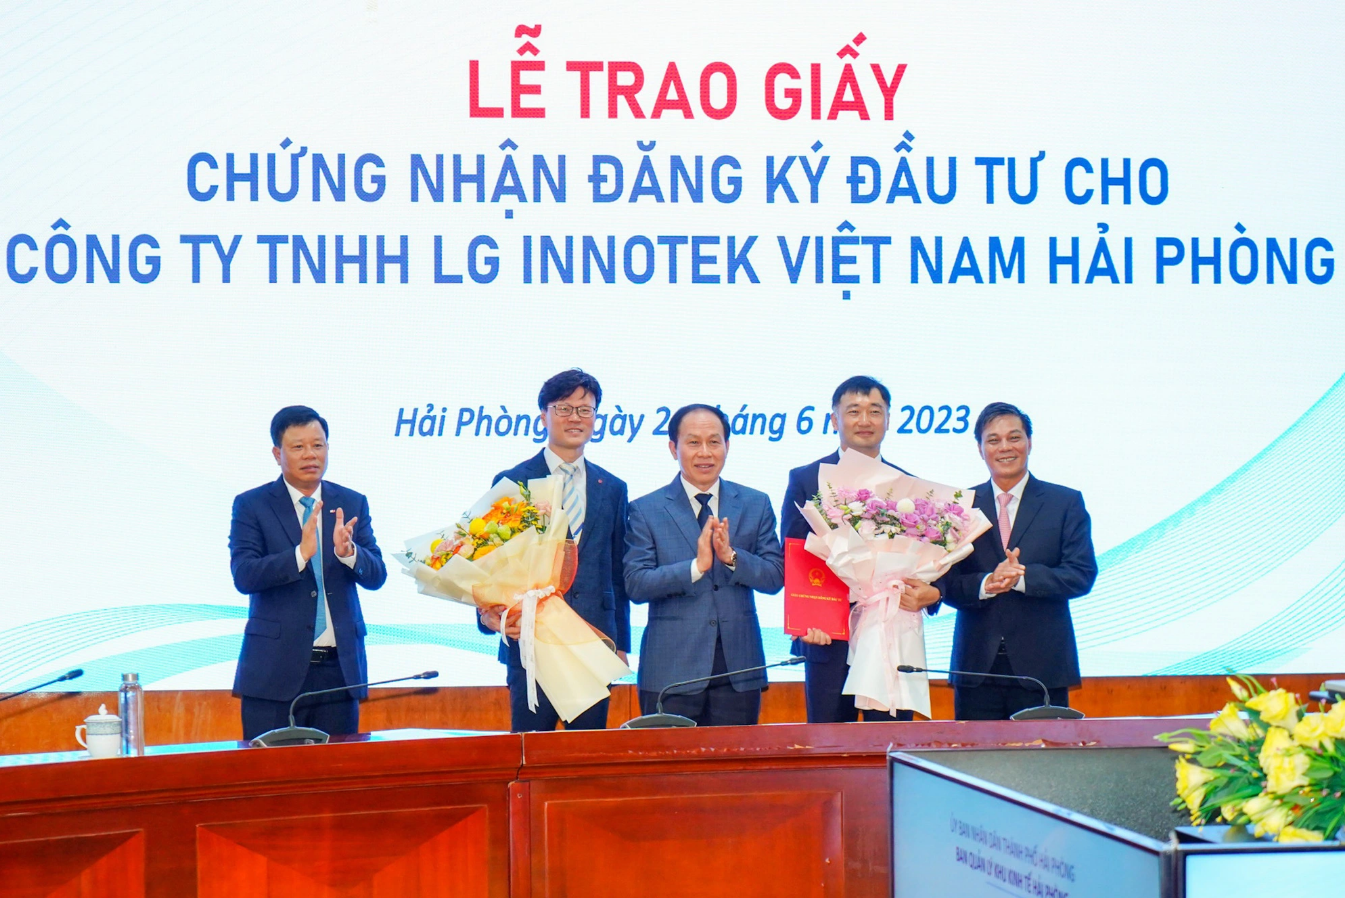 South Korean firm LG pours additional $1bn into Vietnam's Hai Phong